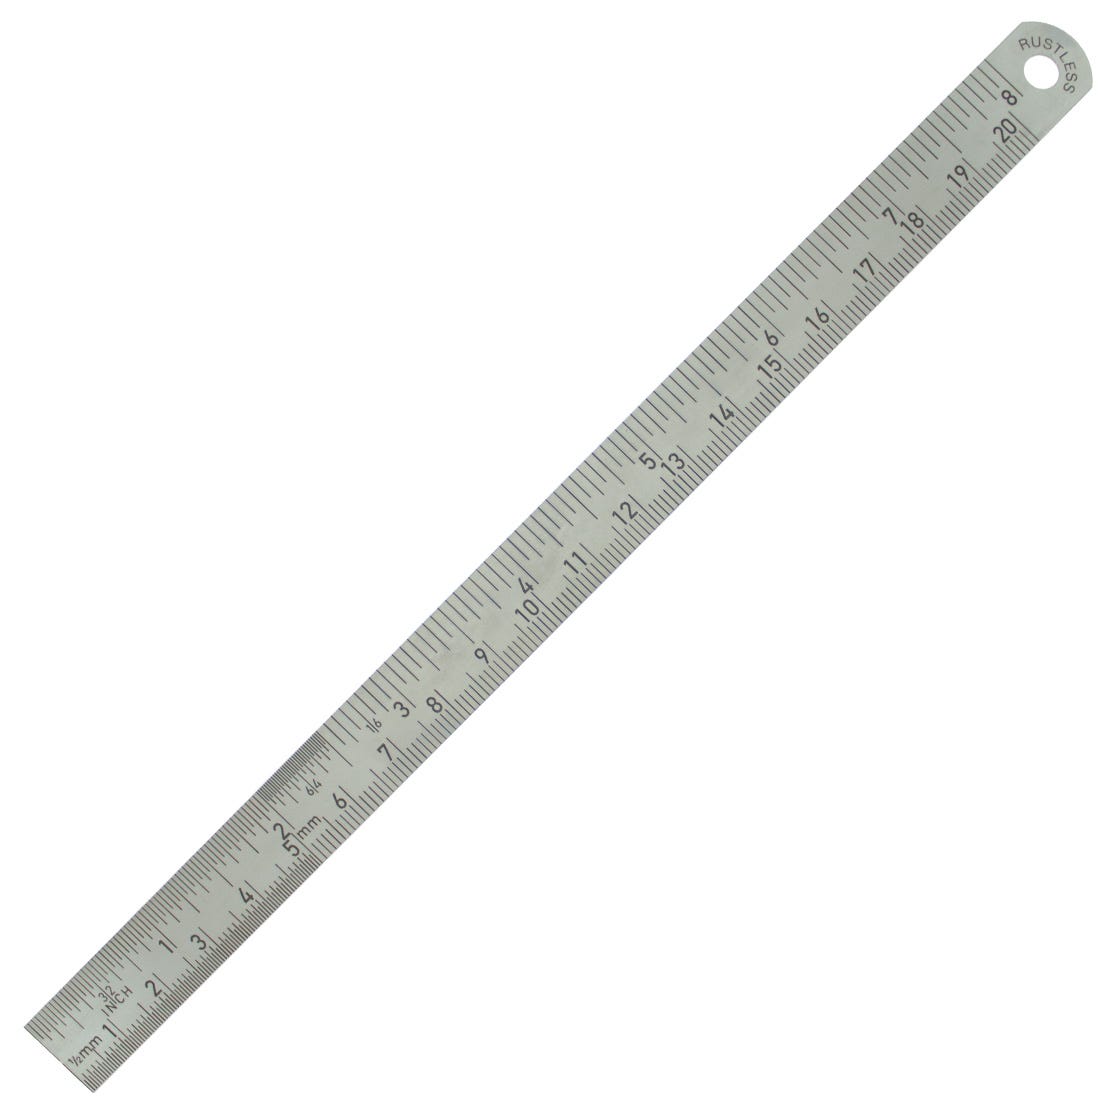 ACE Stainless Steel Ruler, Inches and Millimeter Markings, 1/2"  x 8"